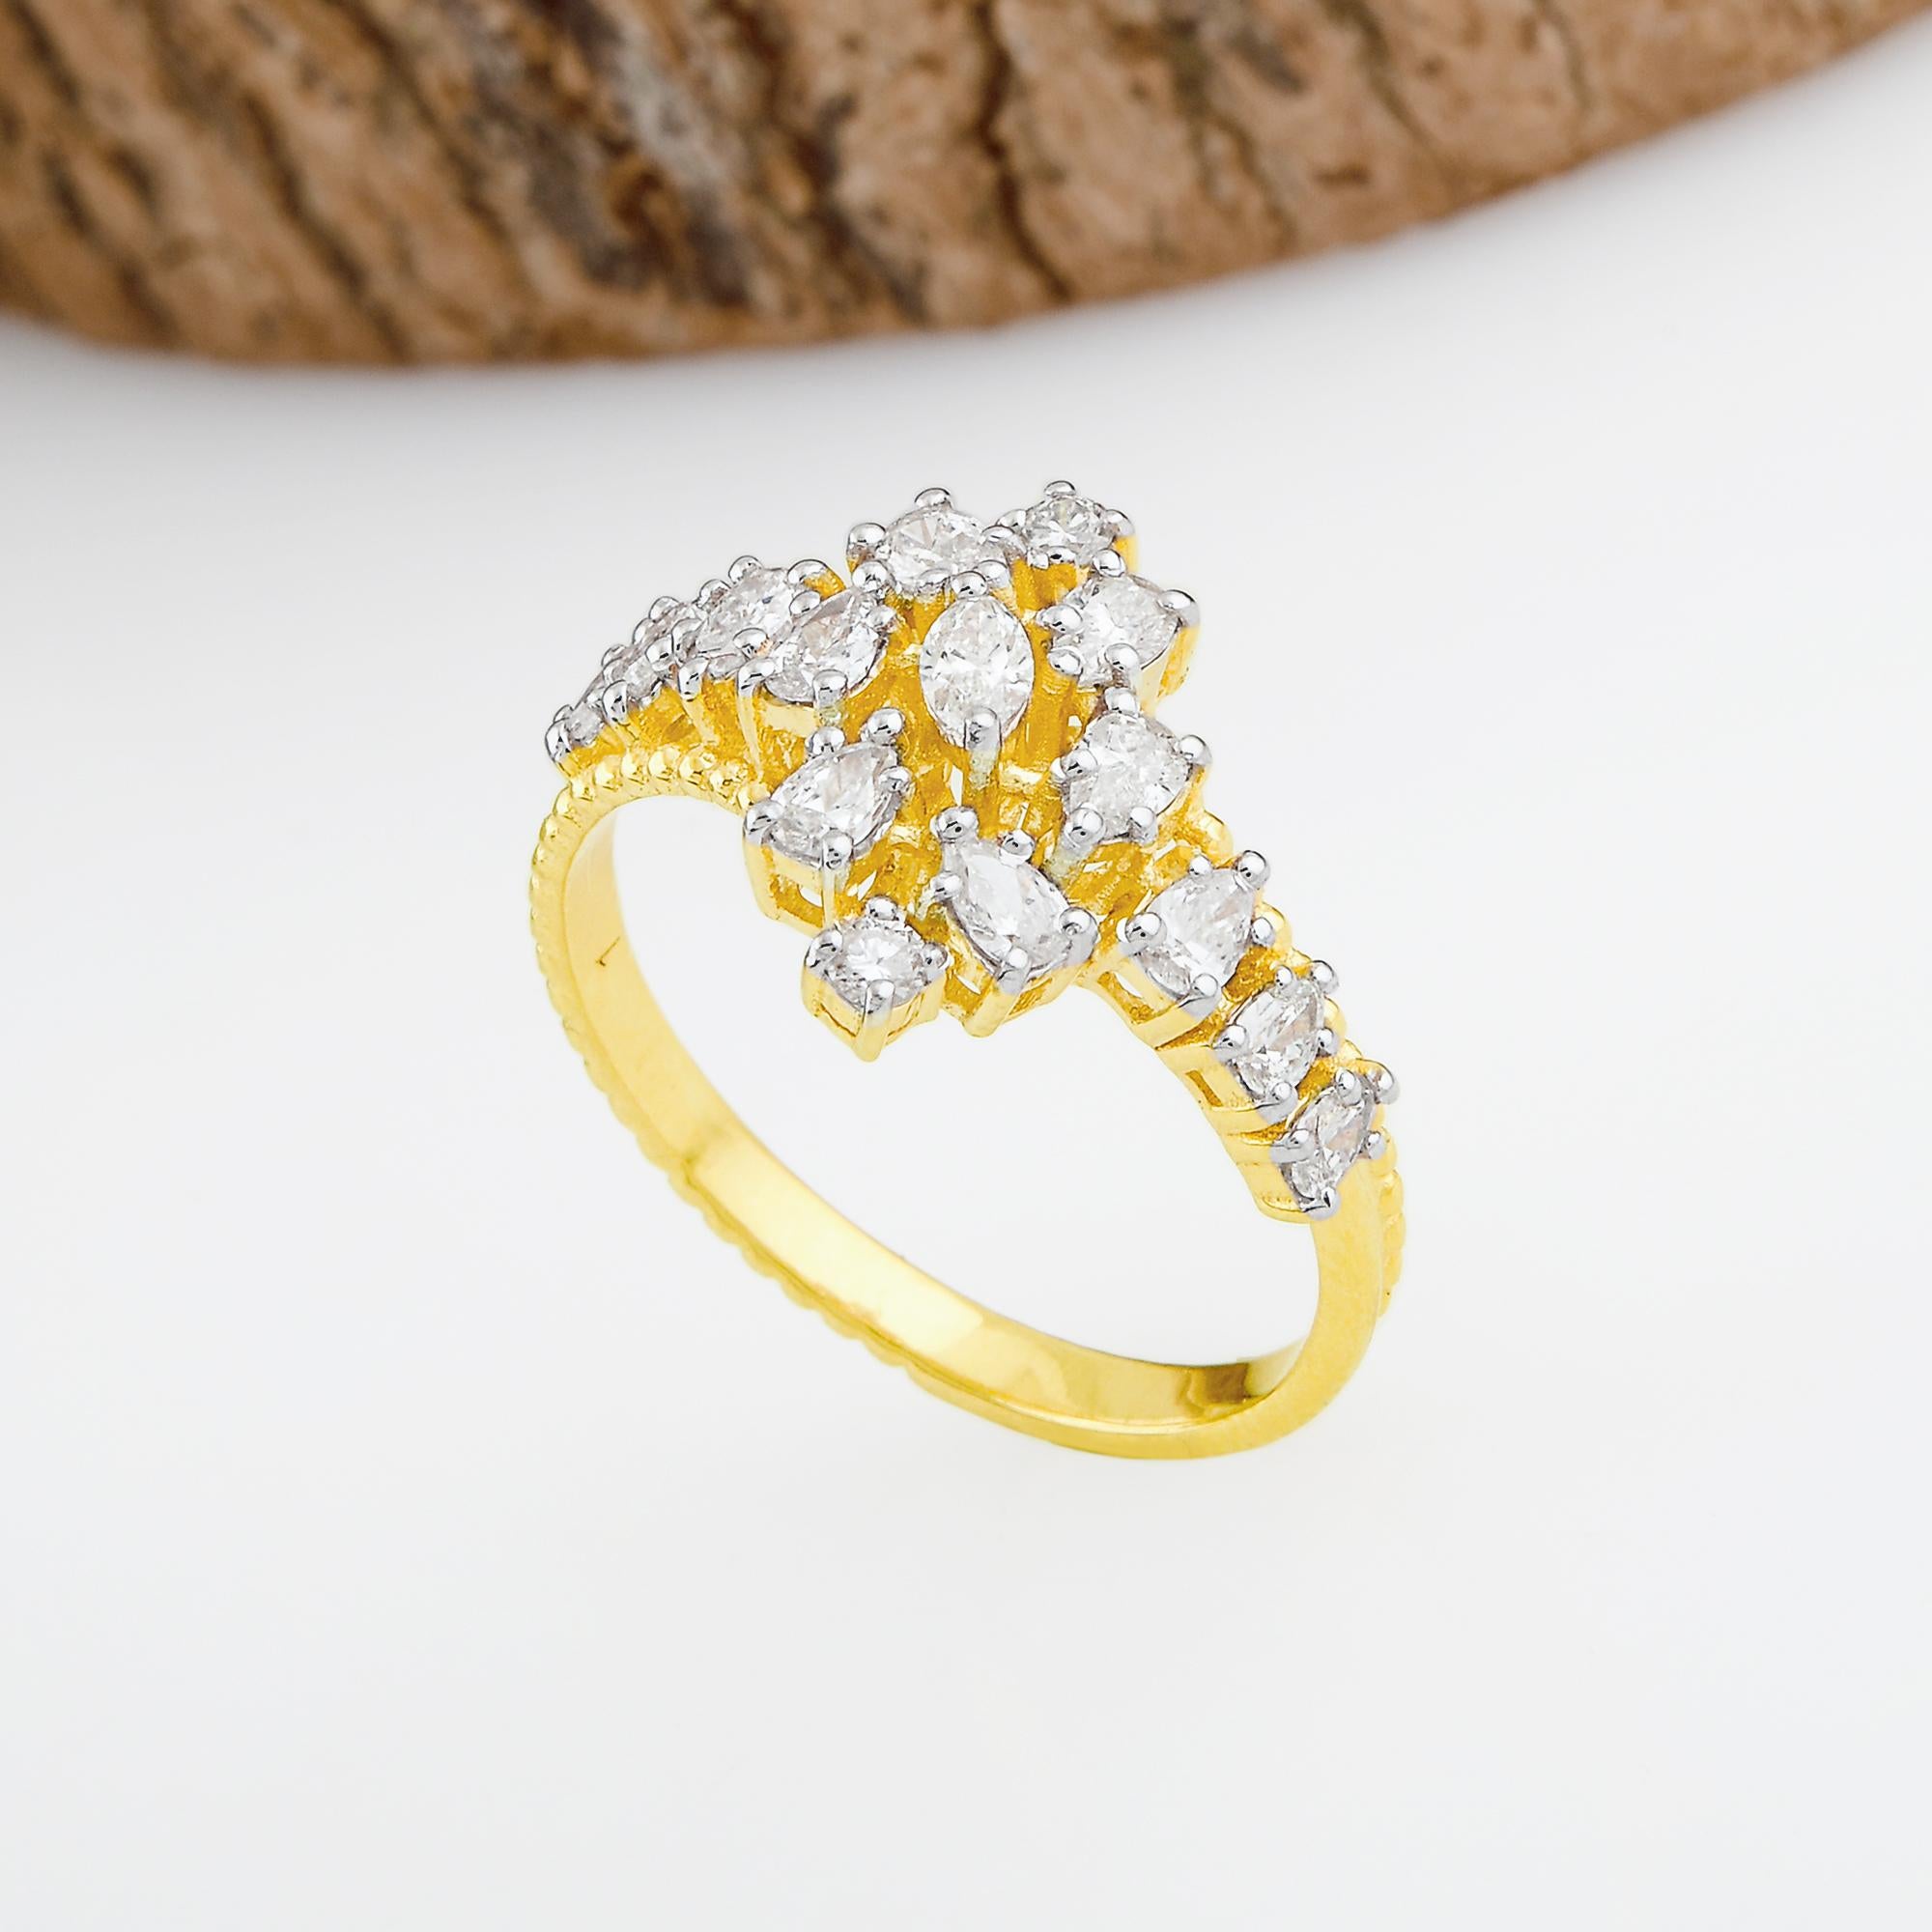 For Sale:  SI Clarity HI Color Marquise Pear Diamond Promise Ring 18 Karat Yellow Gold 5